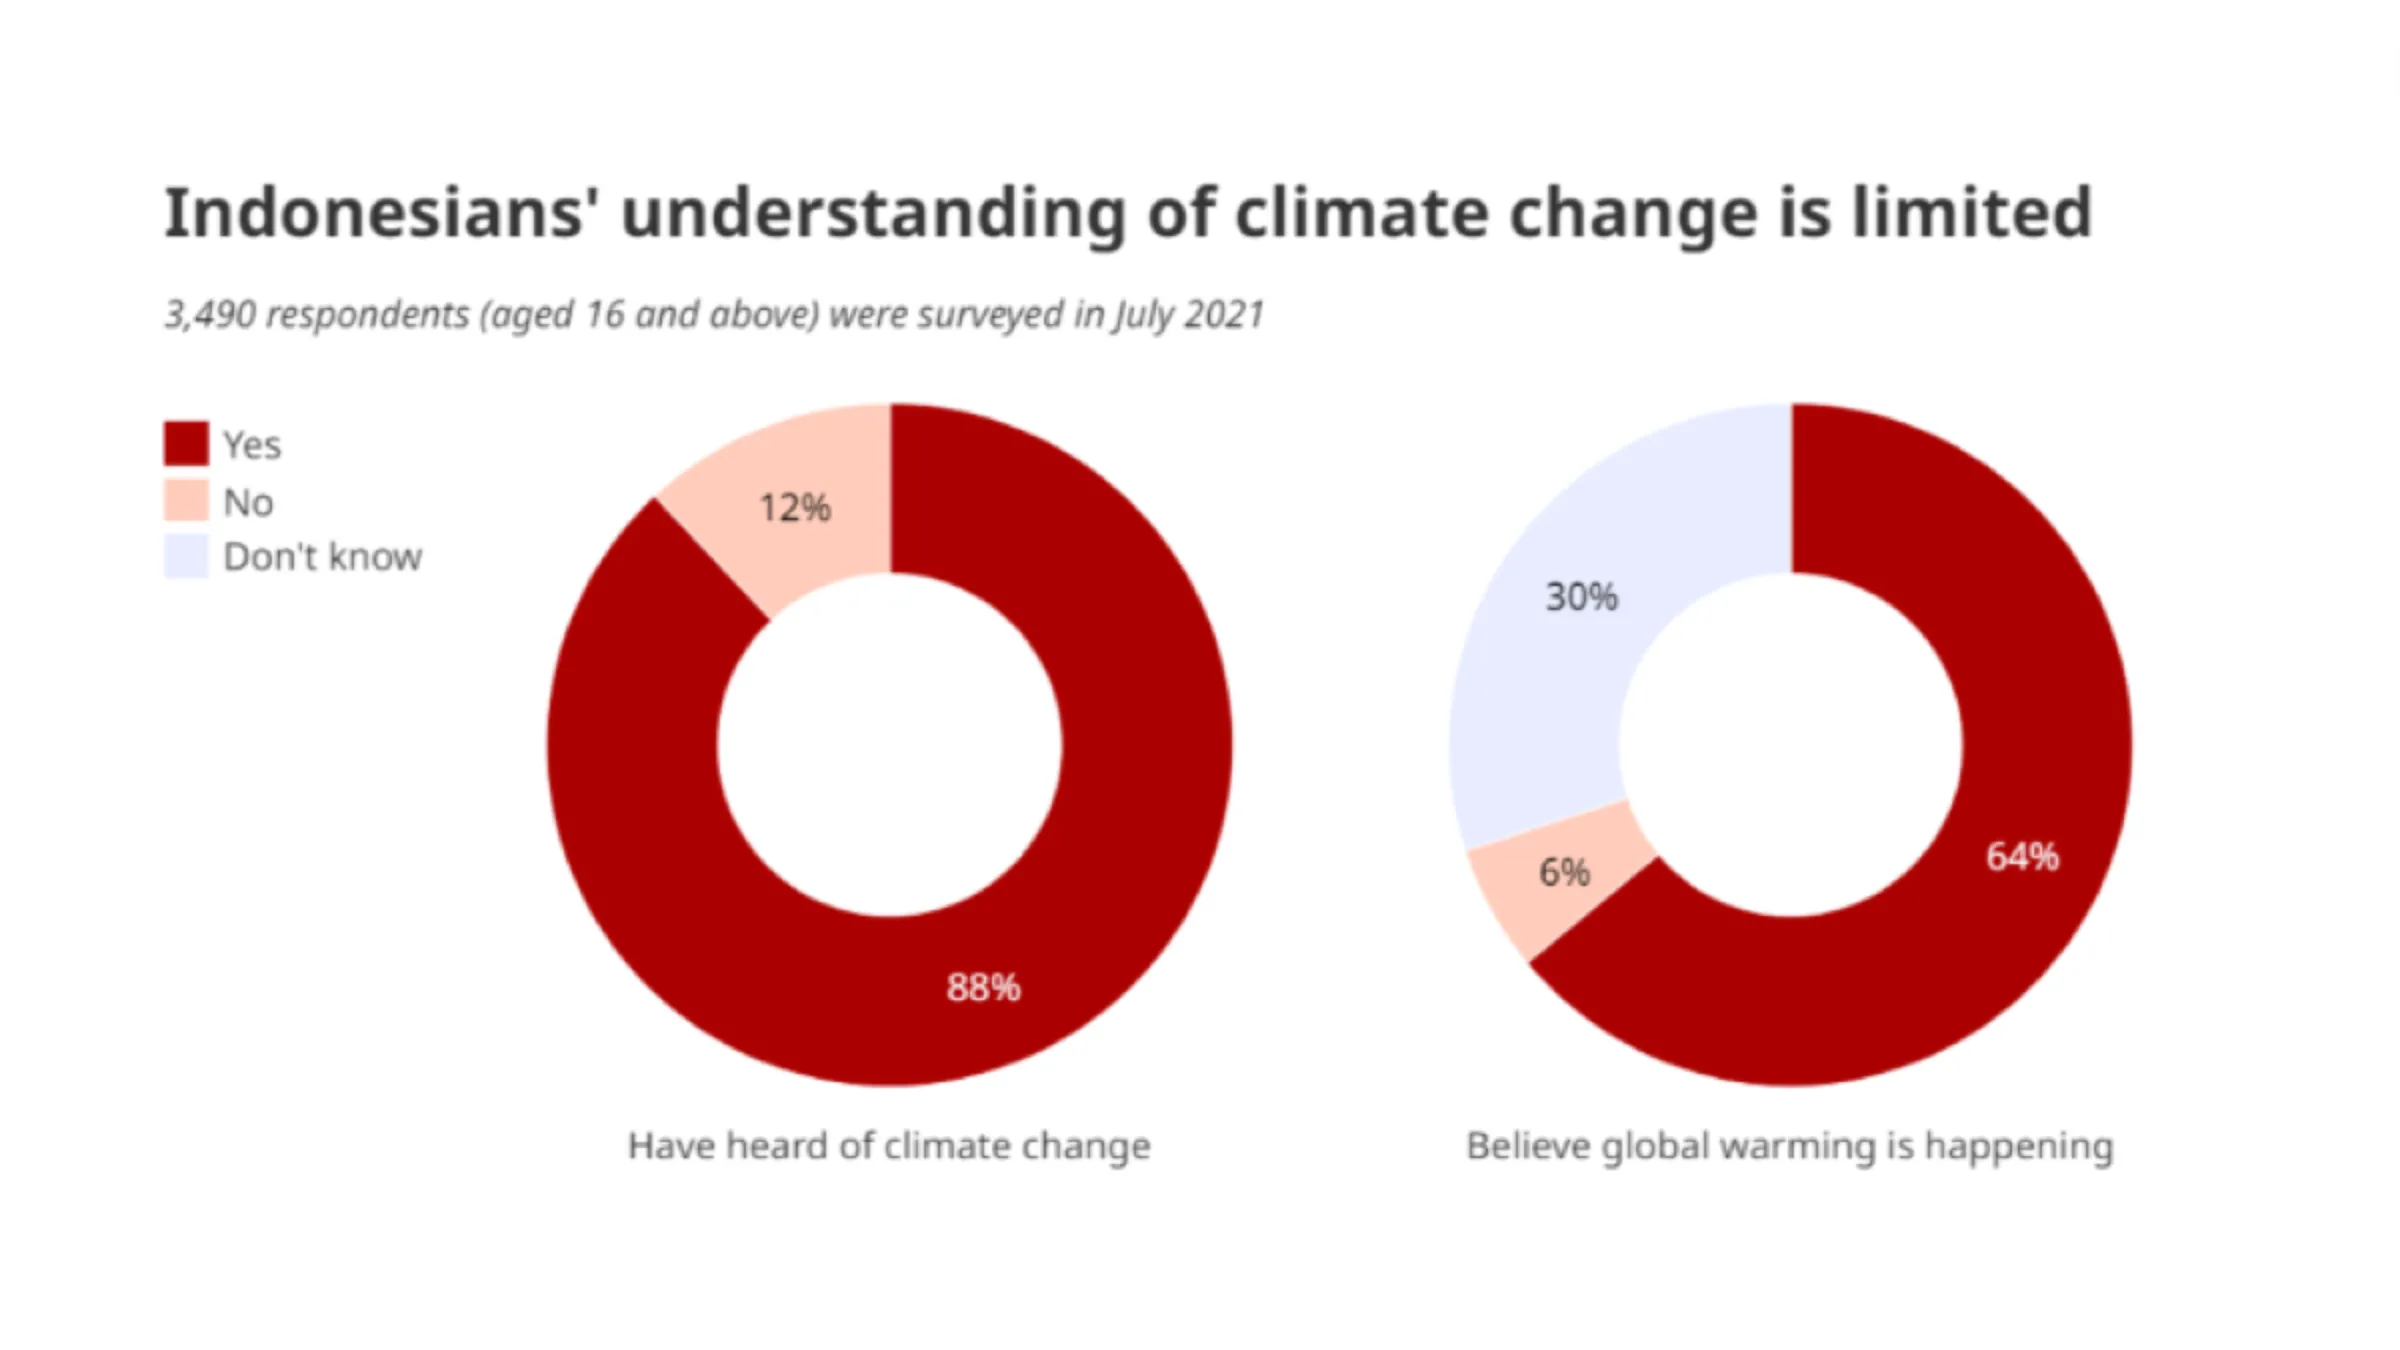 Graph showing Indonesians' understanding of climate change is limited. Surveyed in July 2021, 3,490 respondents aged 16 and above answered three questions. 
88% had heard about climate change, while 12% hadn't. 
Finally,  64% of the respondents believe that global warming is happening, 6% don't, while 30% don't know.